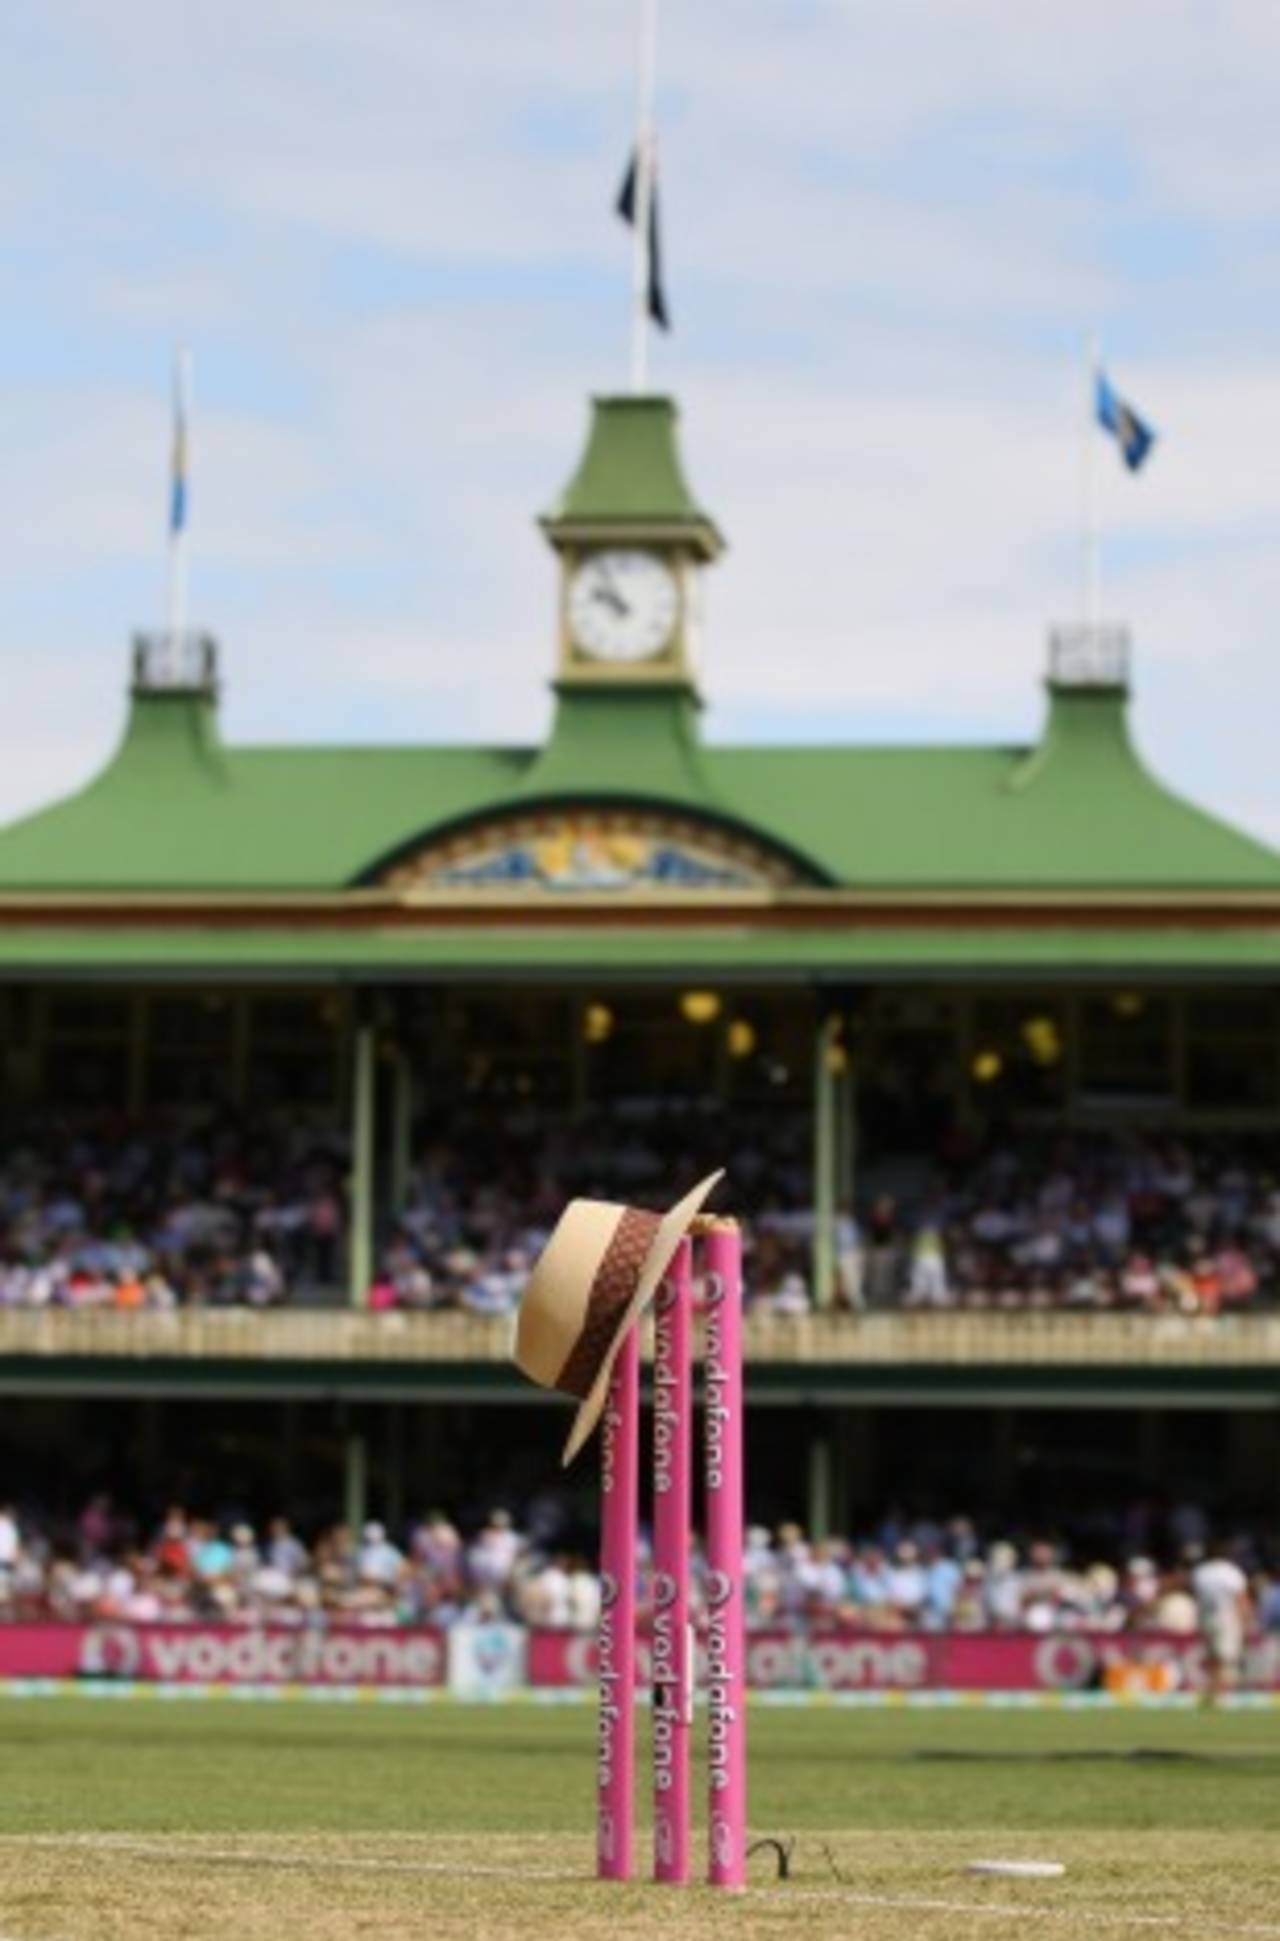 Before play, on the stumps at the Paddington end was hung Tony Greig's trademark broad-brimmed hat&nbsp;&nbsp;&bull;&nbsp;&nbsp;Getty Images